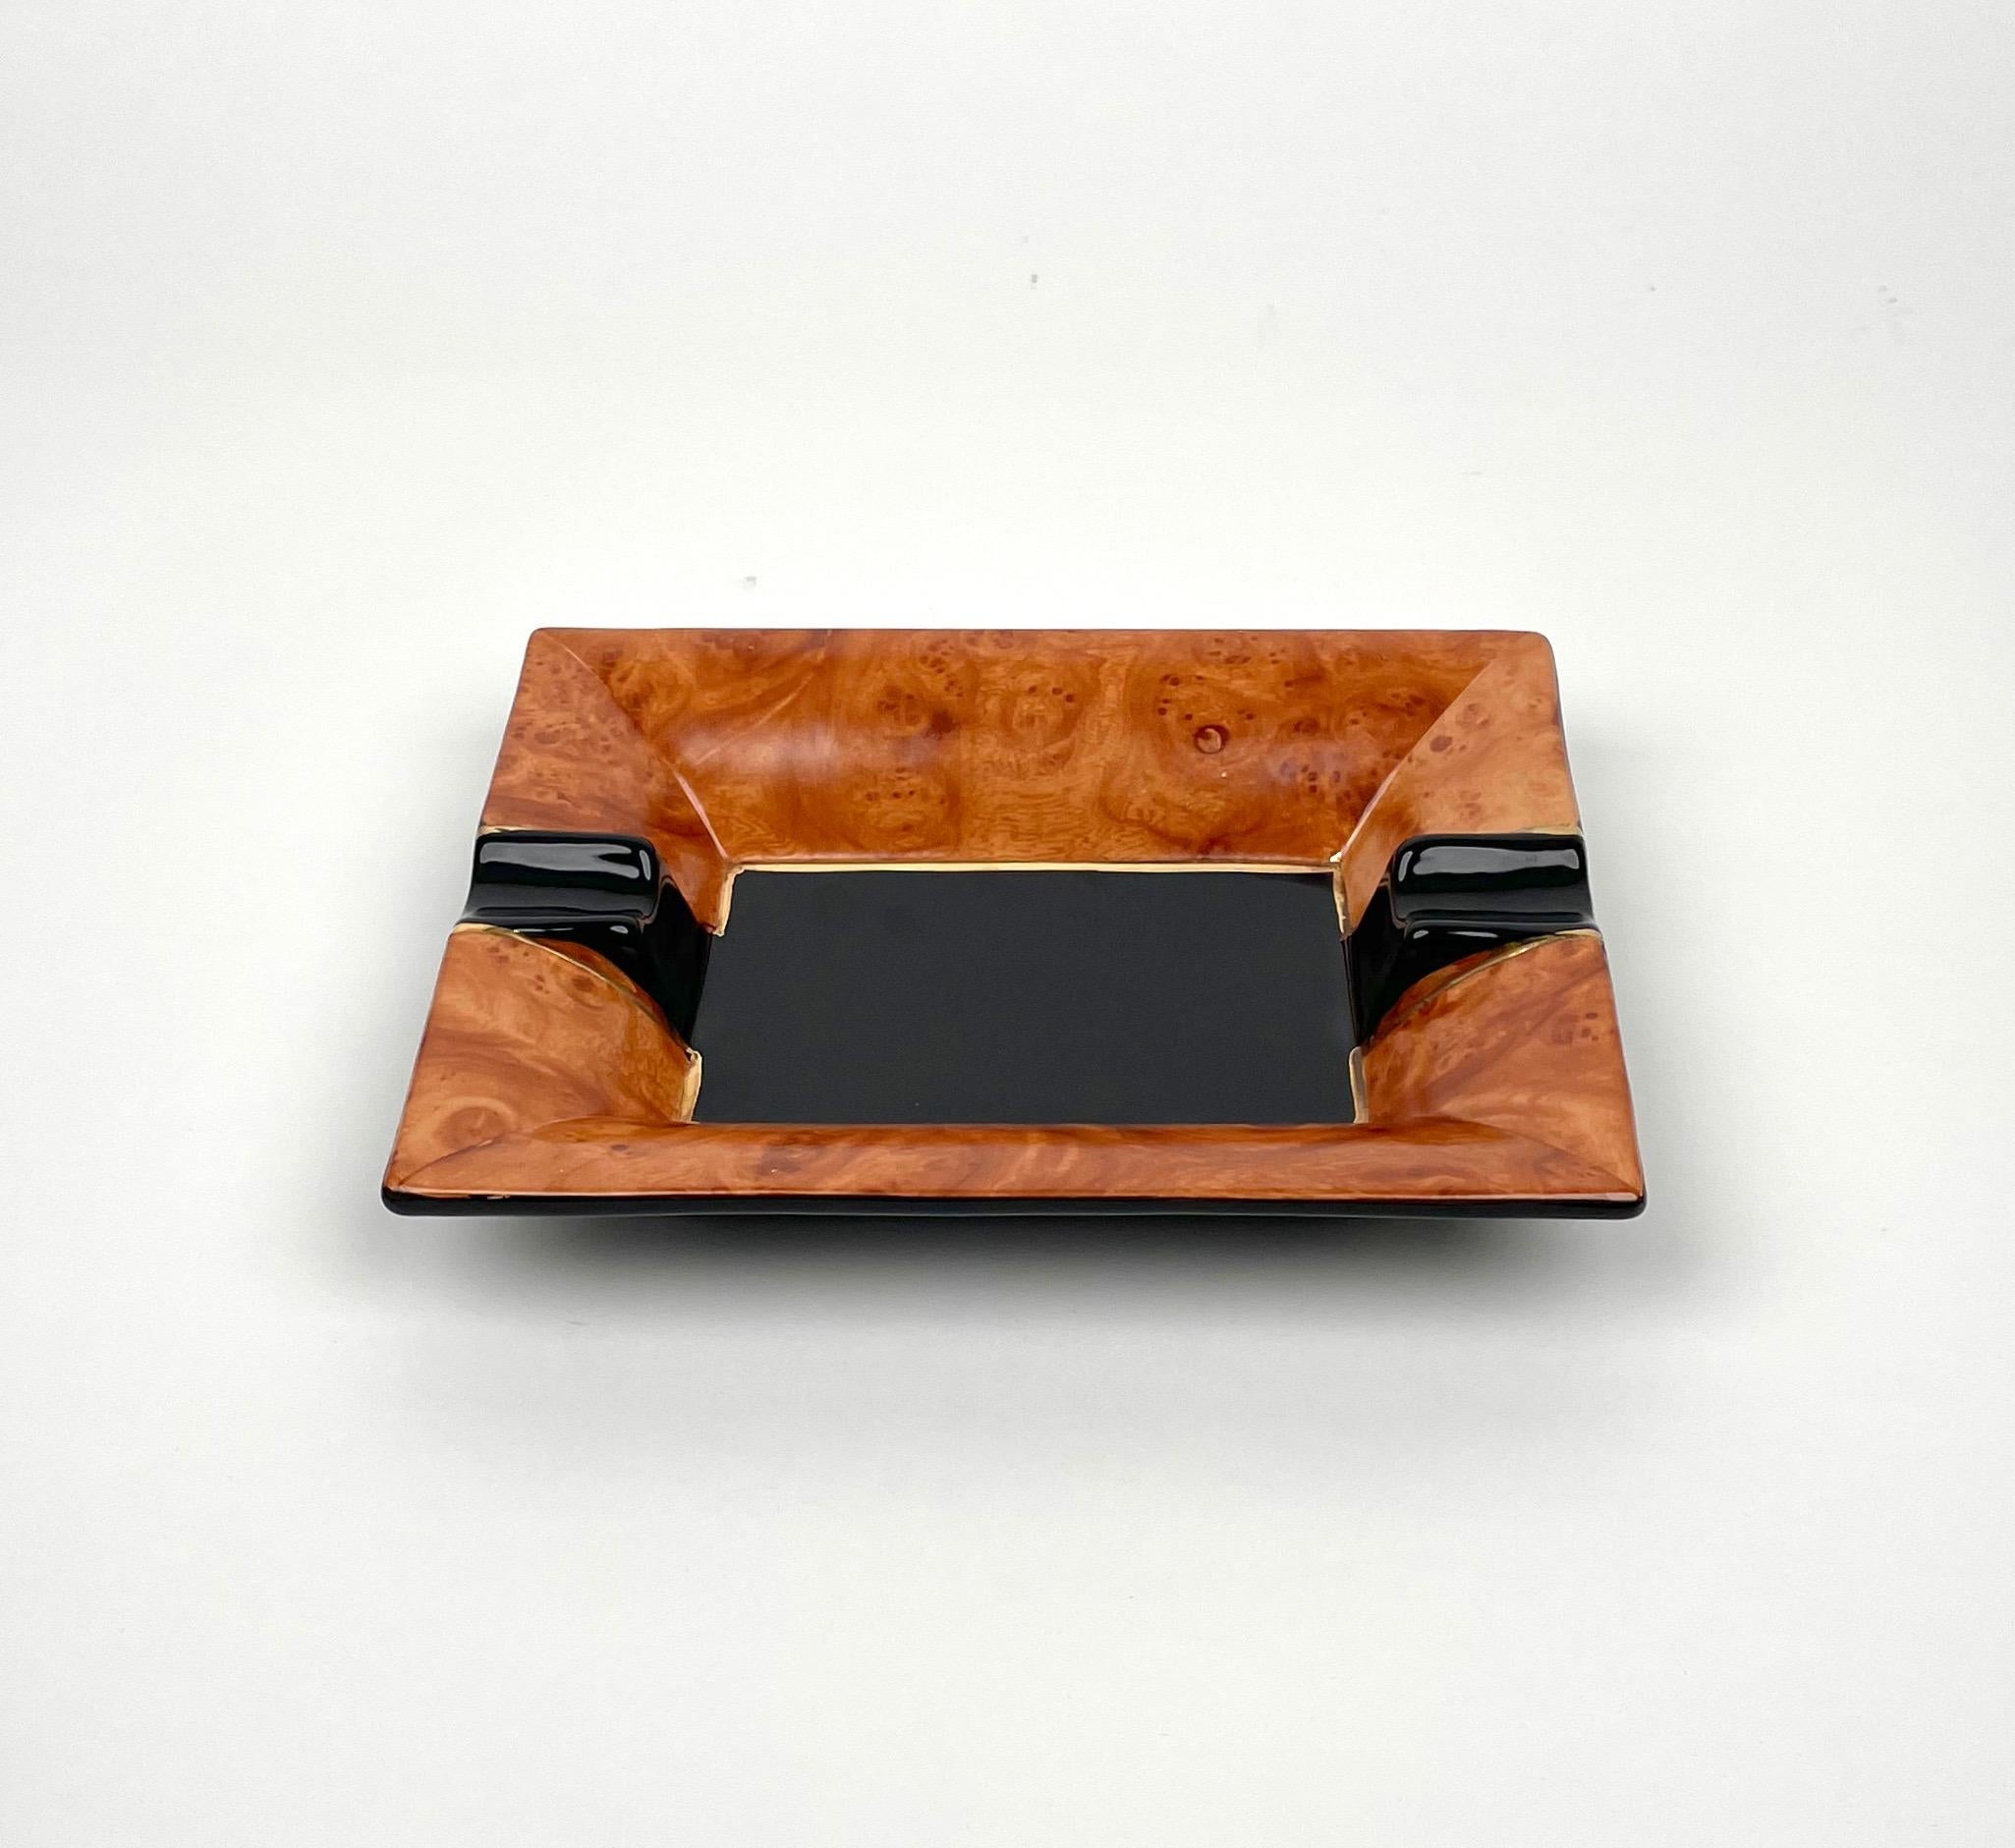 Rectangular ashtray in ceramic by Tommaso Barbi for B Ceramiche made in Italy in the 1970s.

The original label is still attached on the bottom, as shown in the photos.